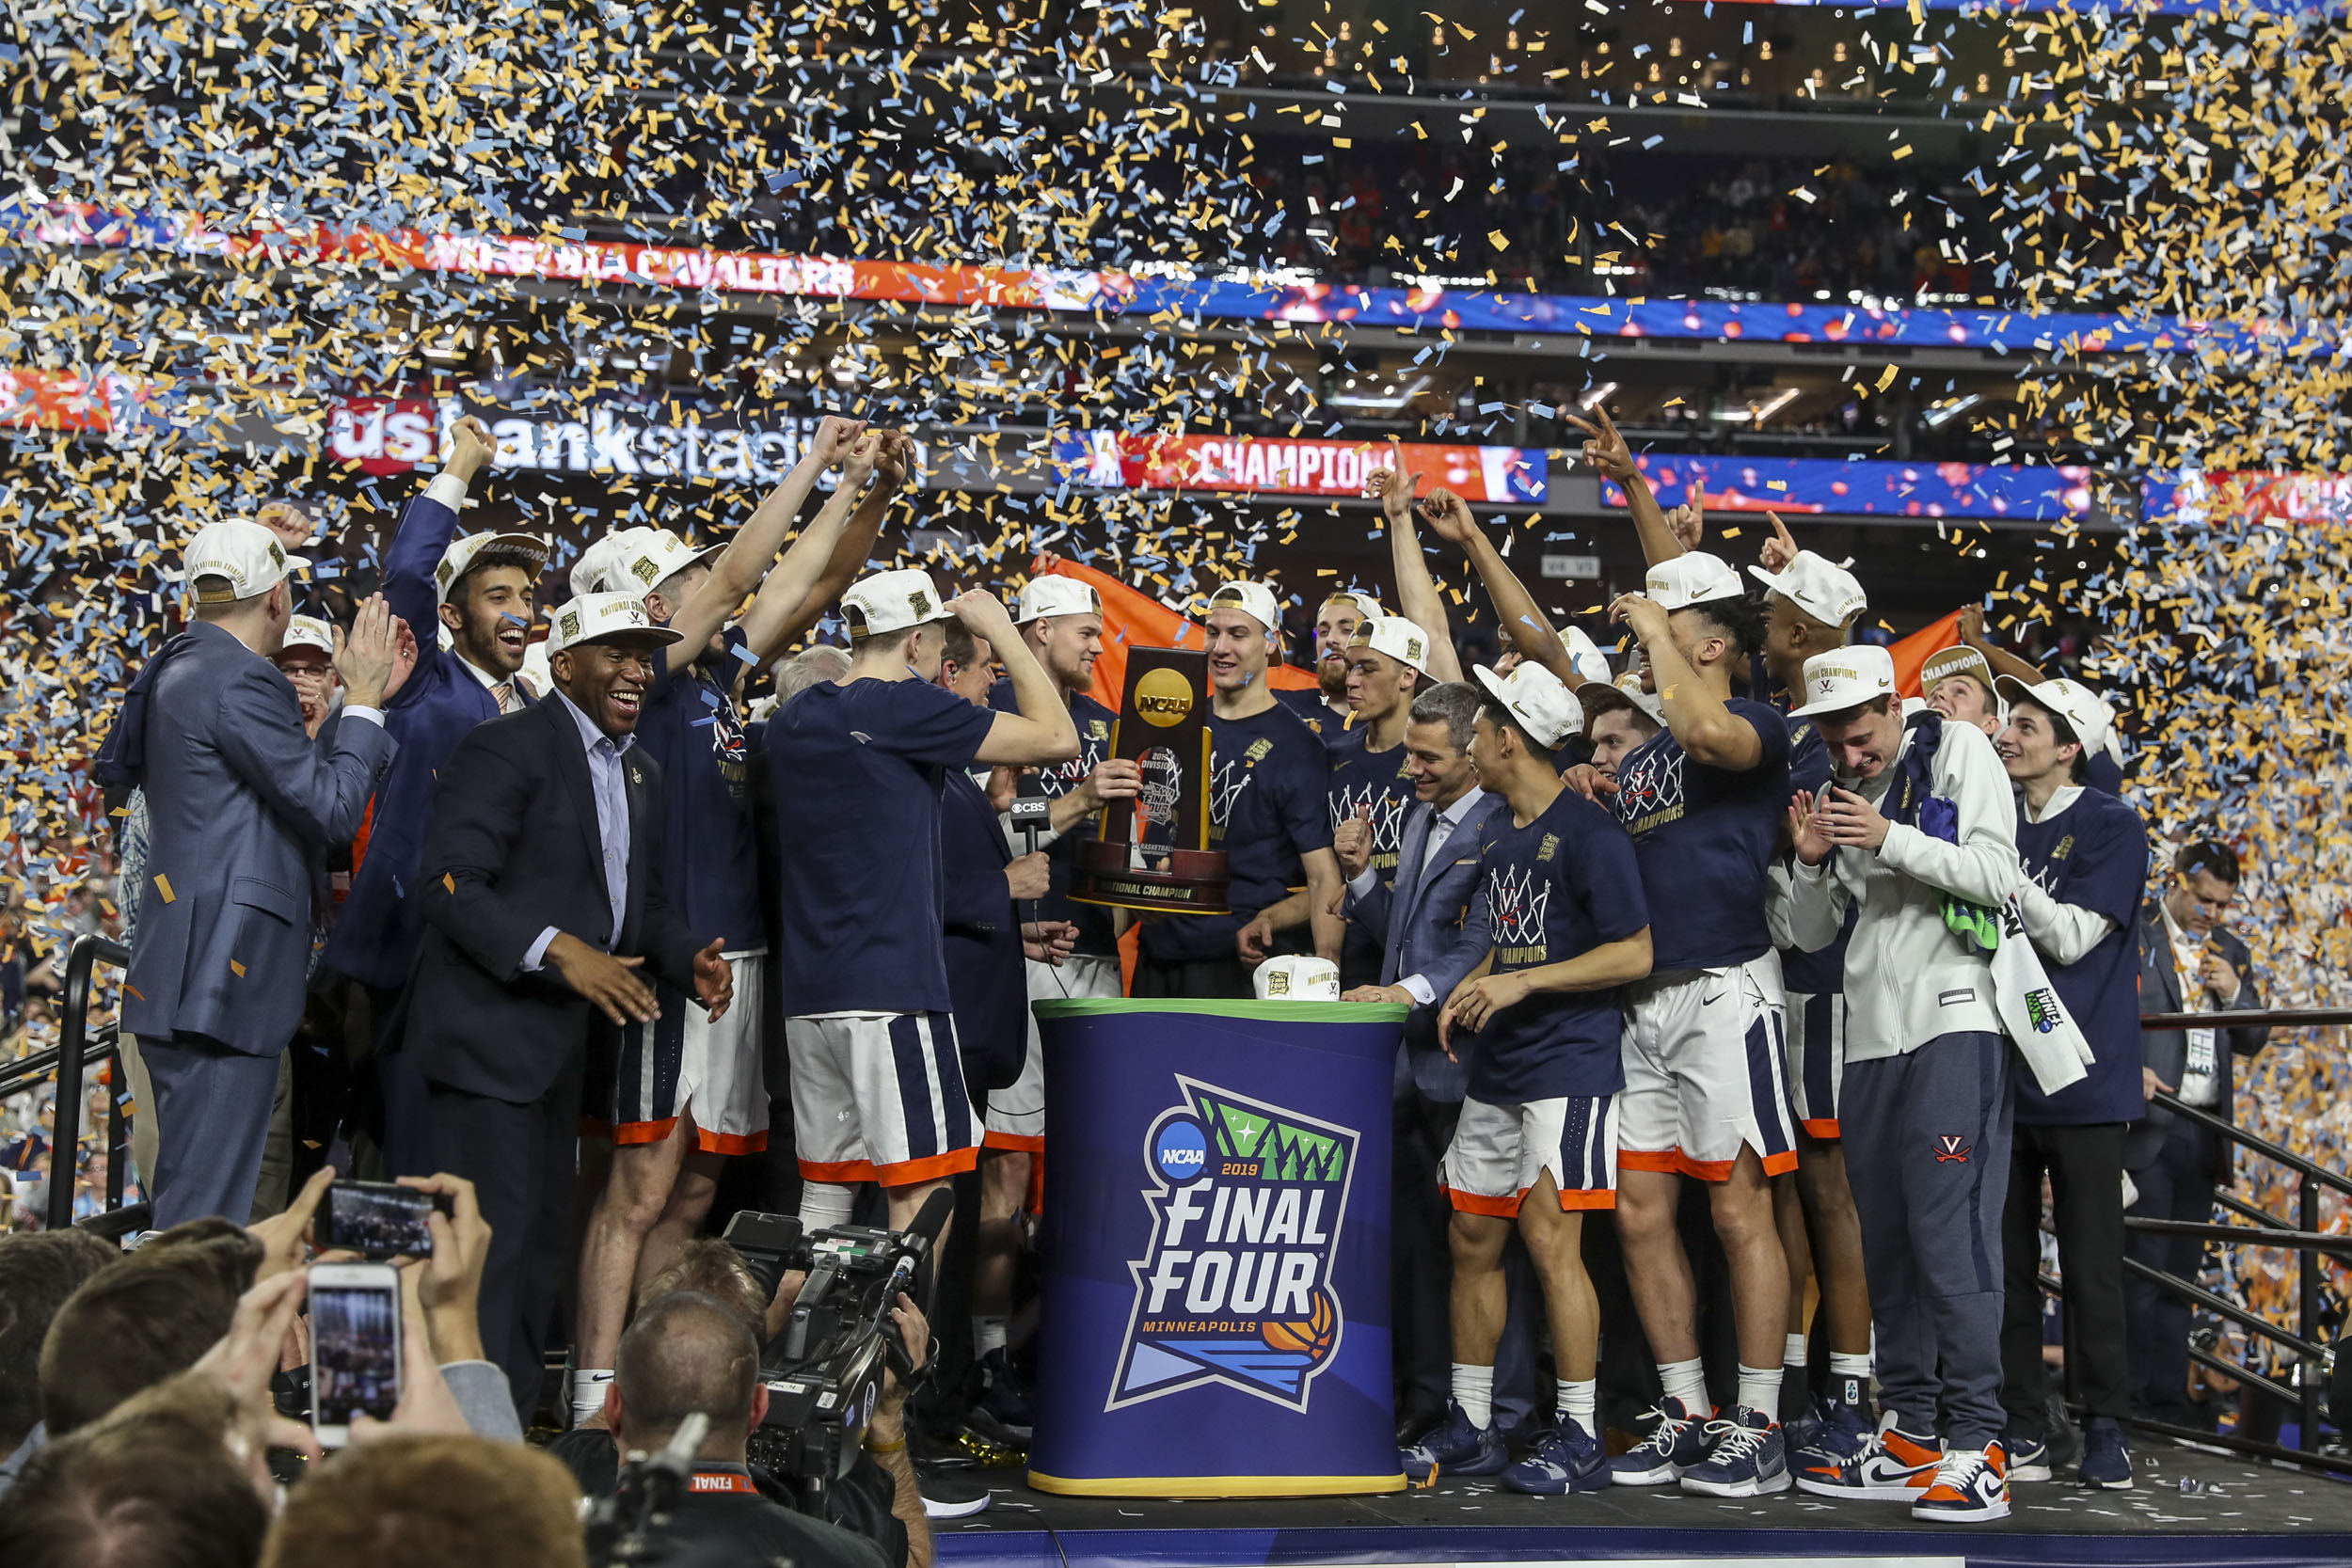 Blue-and-orange confetti raining down on a stage with the UVA basketball team on it with a podium that reads NCAA the Final four